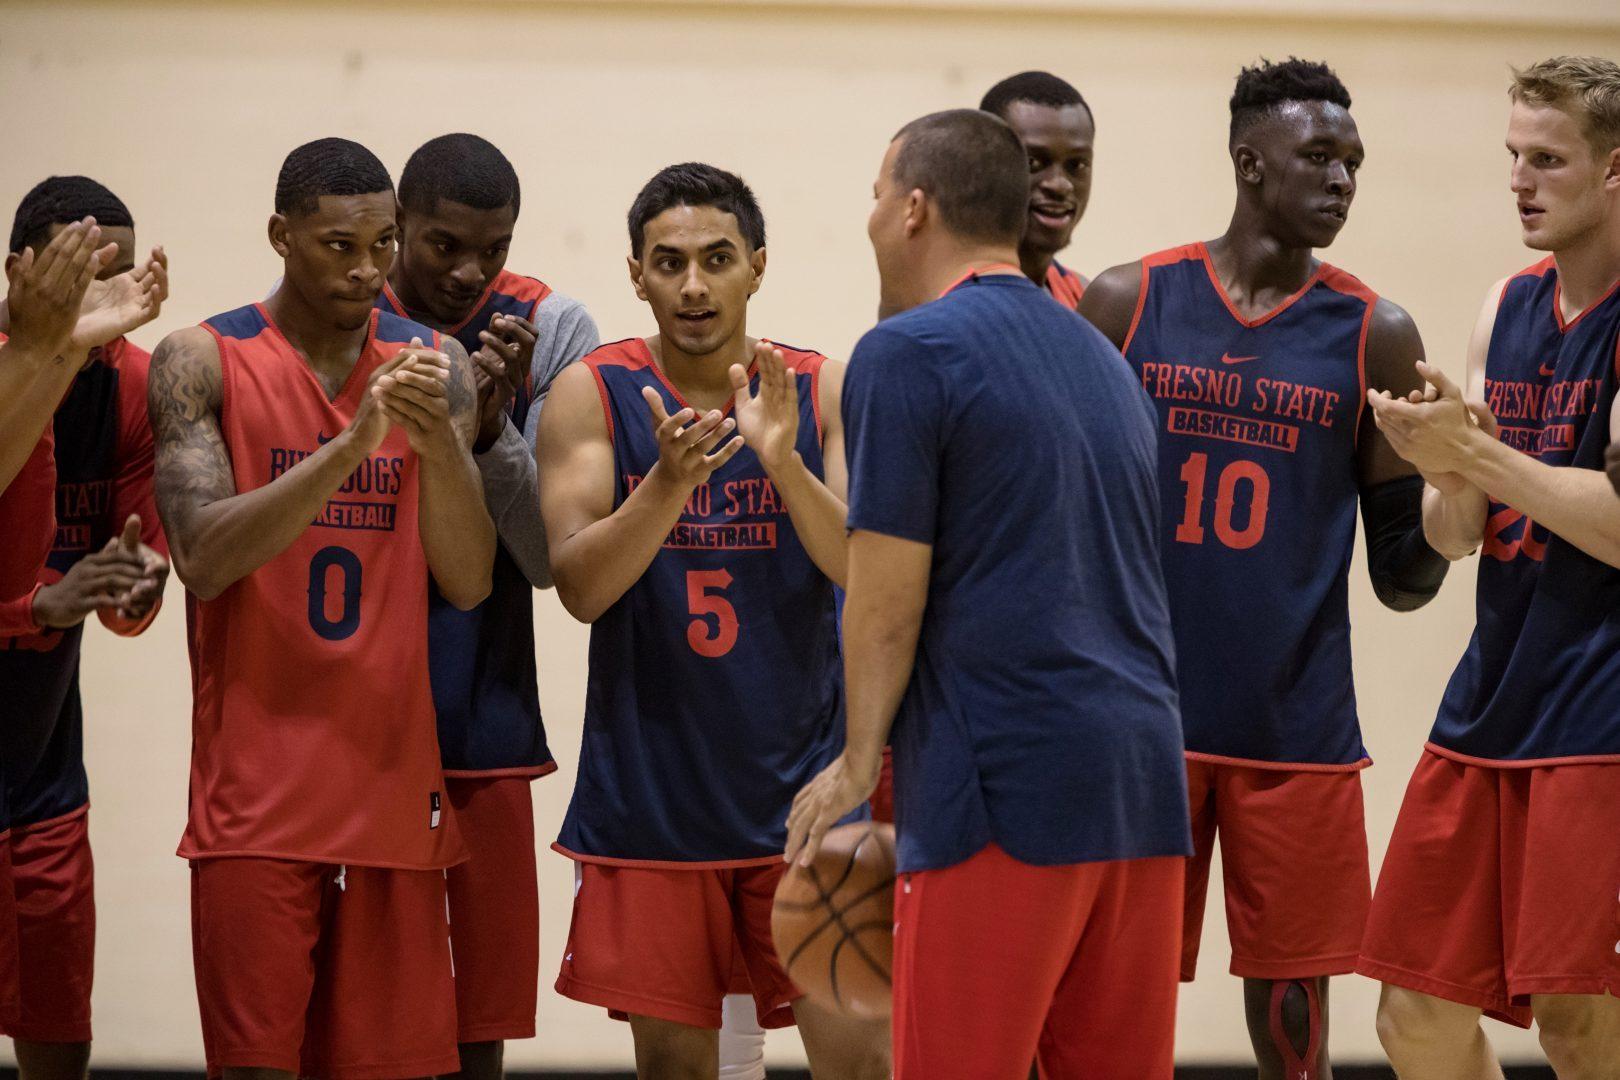 New Bulldogs mens basketball coach Justin Hutson pumps up his team during practice. Sept. 27, 2018. (Keith Kountz/Fresno State Athletics)